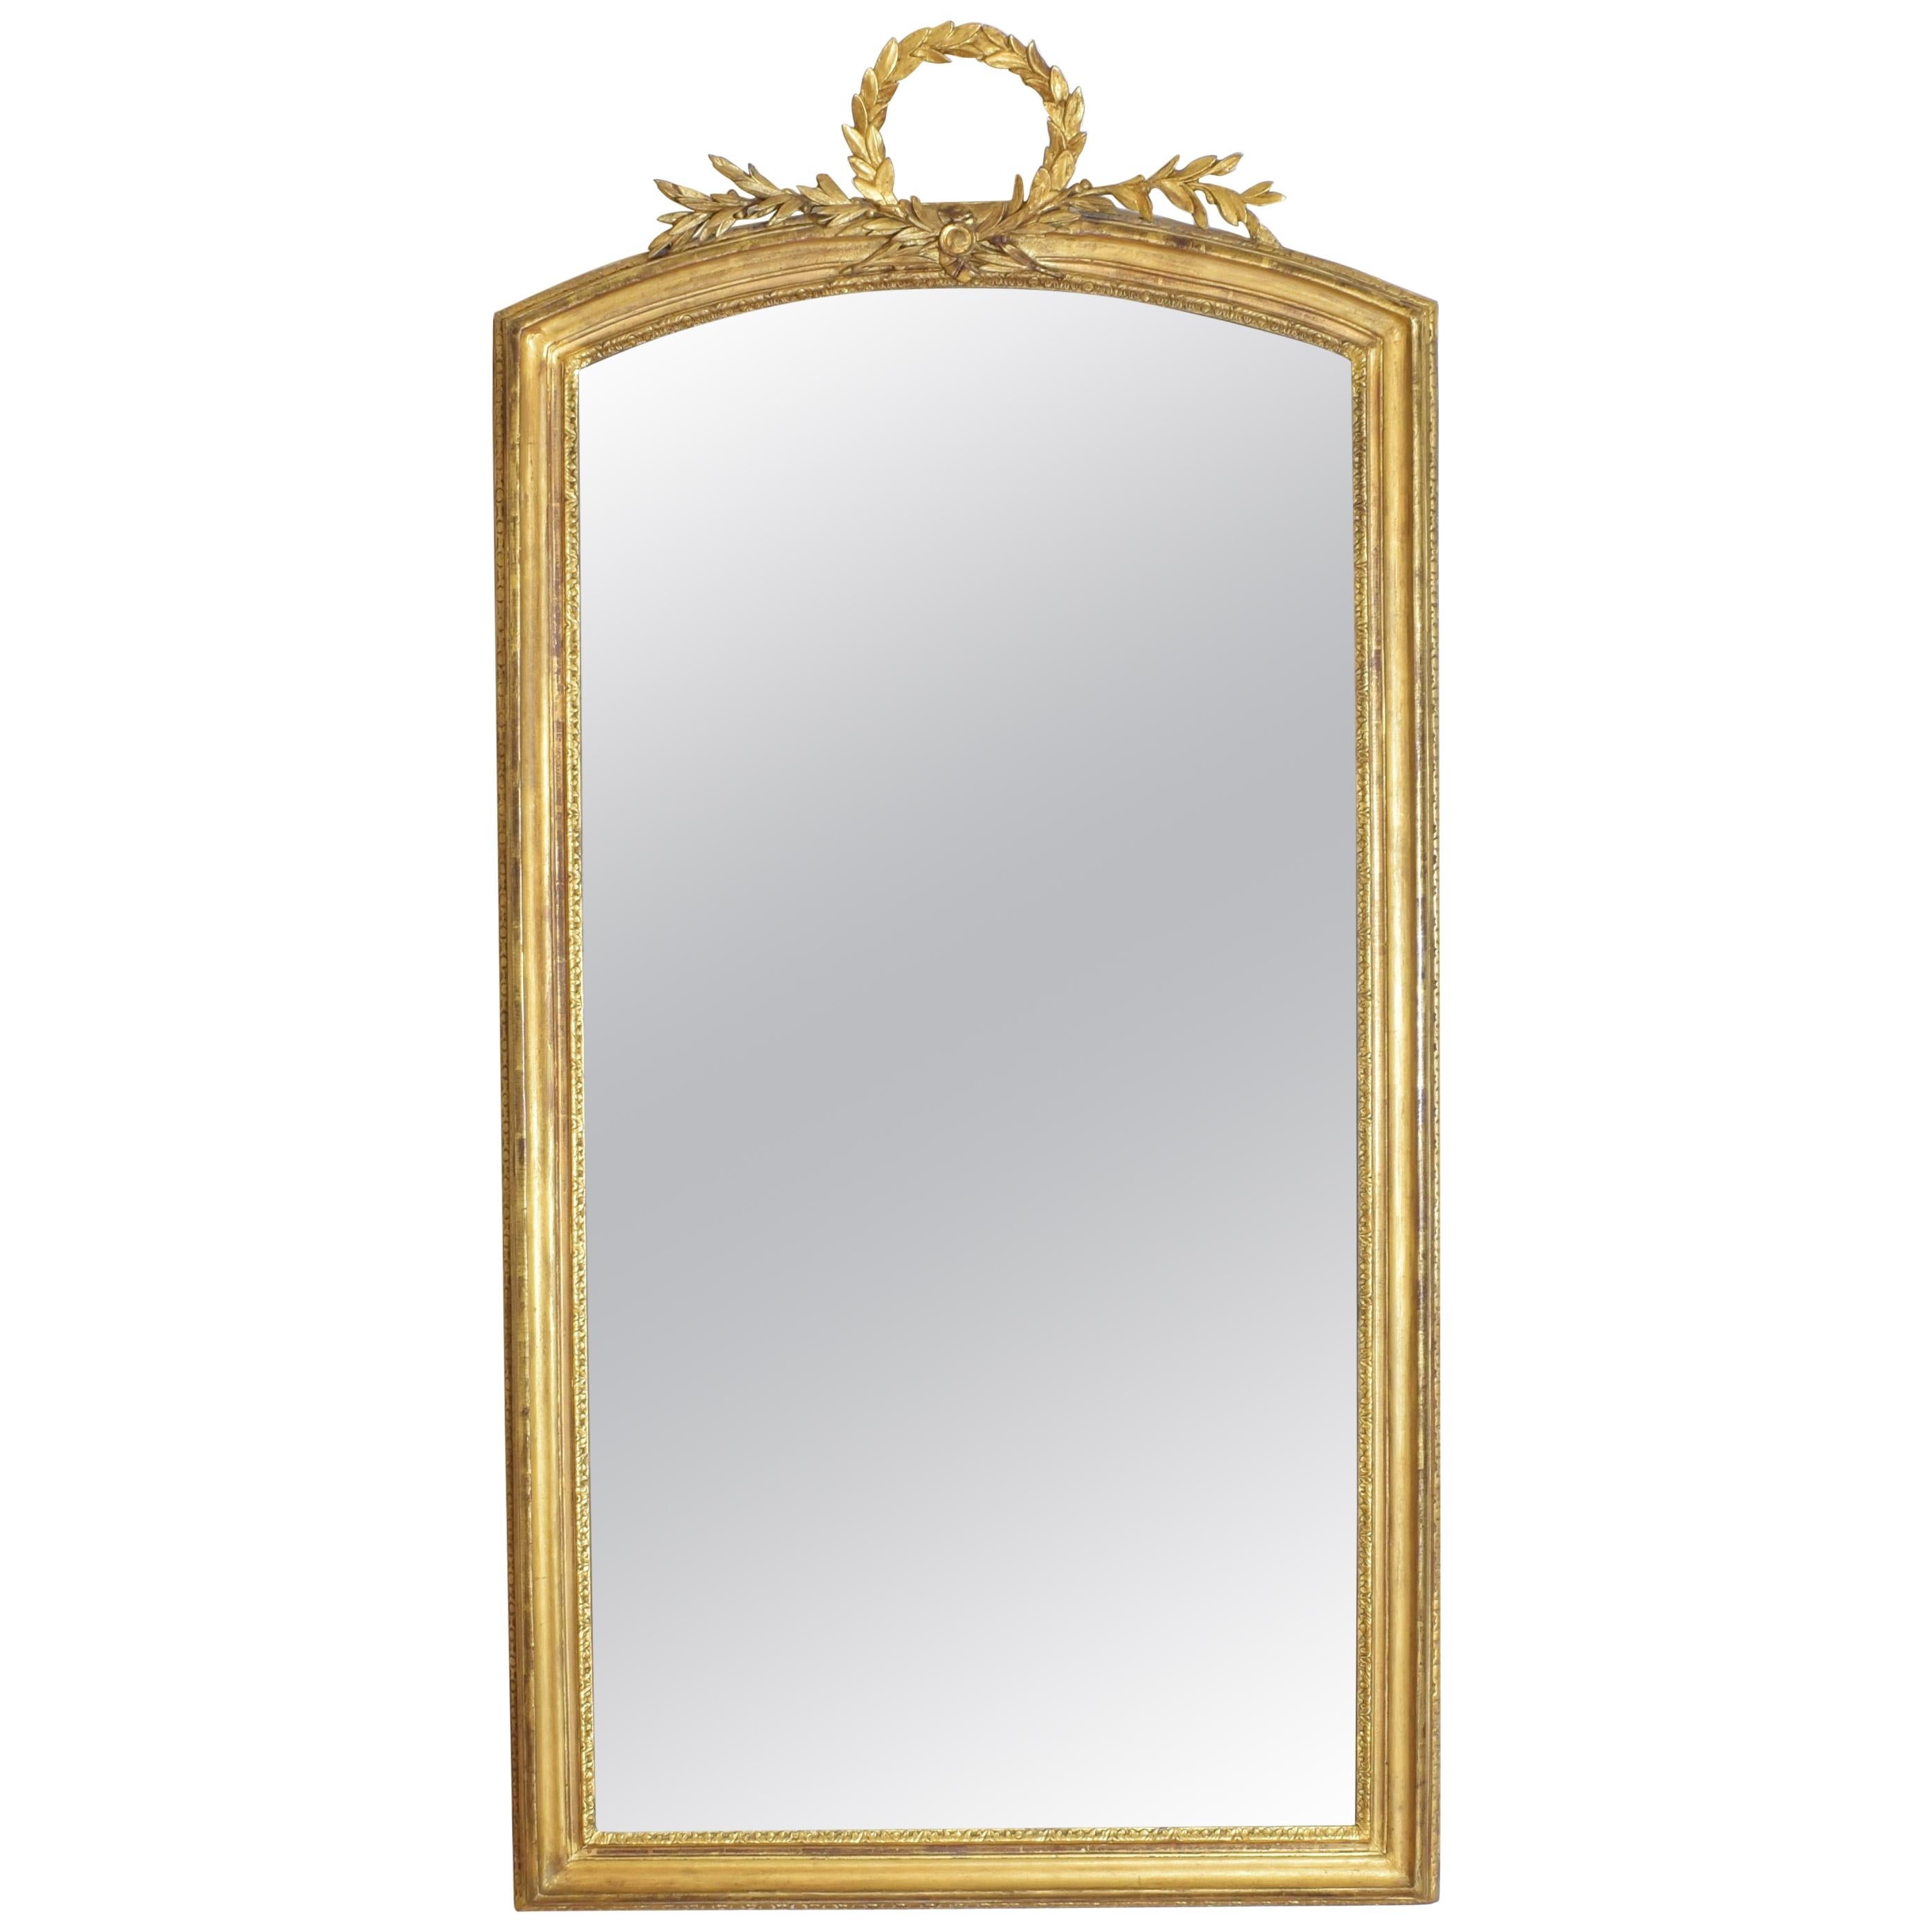 French Carved Giltwood and Carved Gesso Tall Mirror, Mid-19th Century